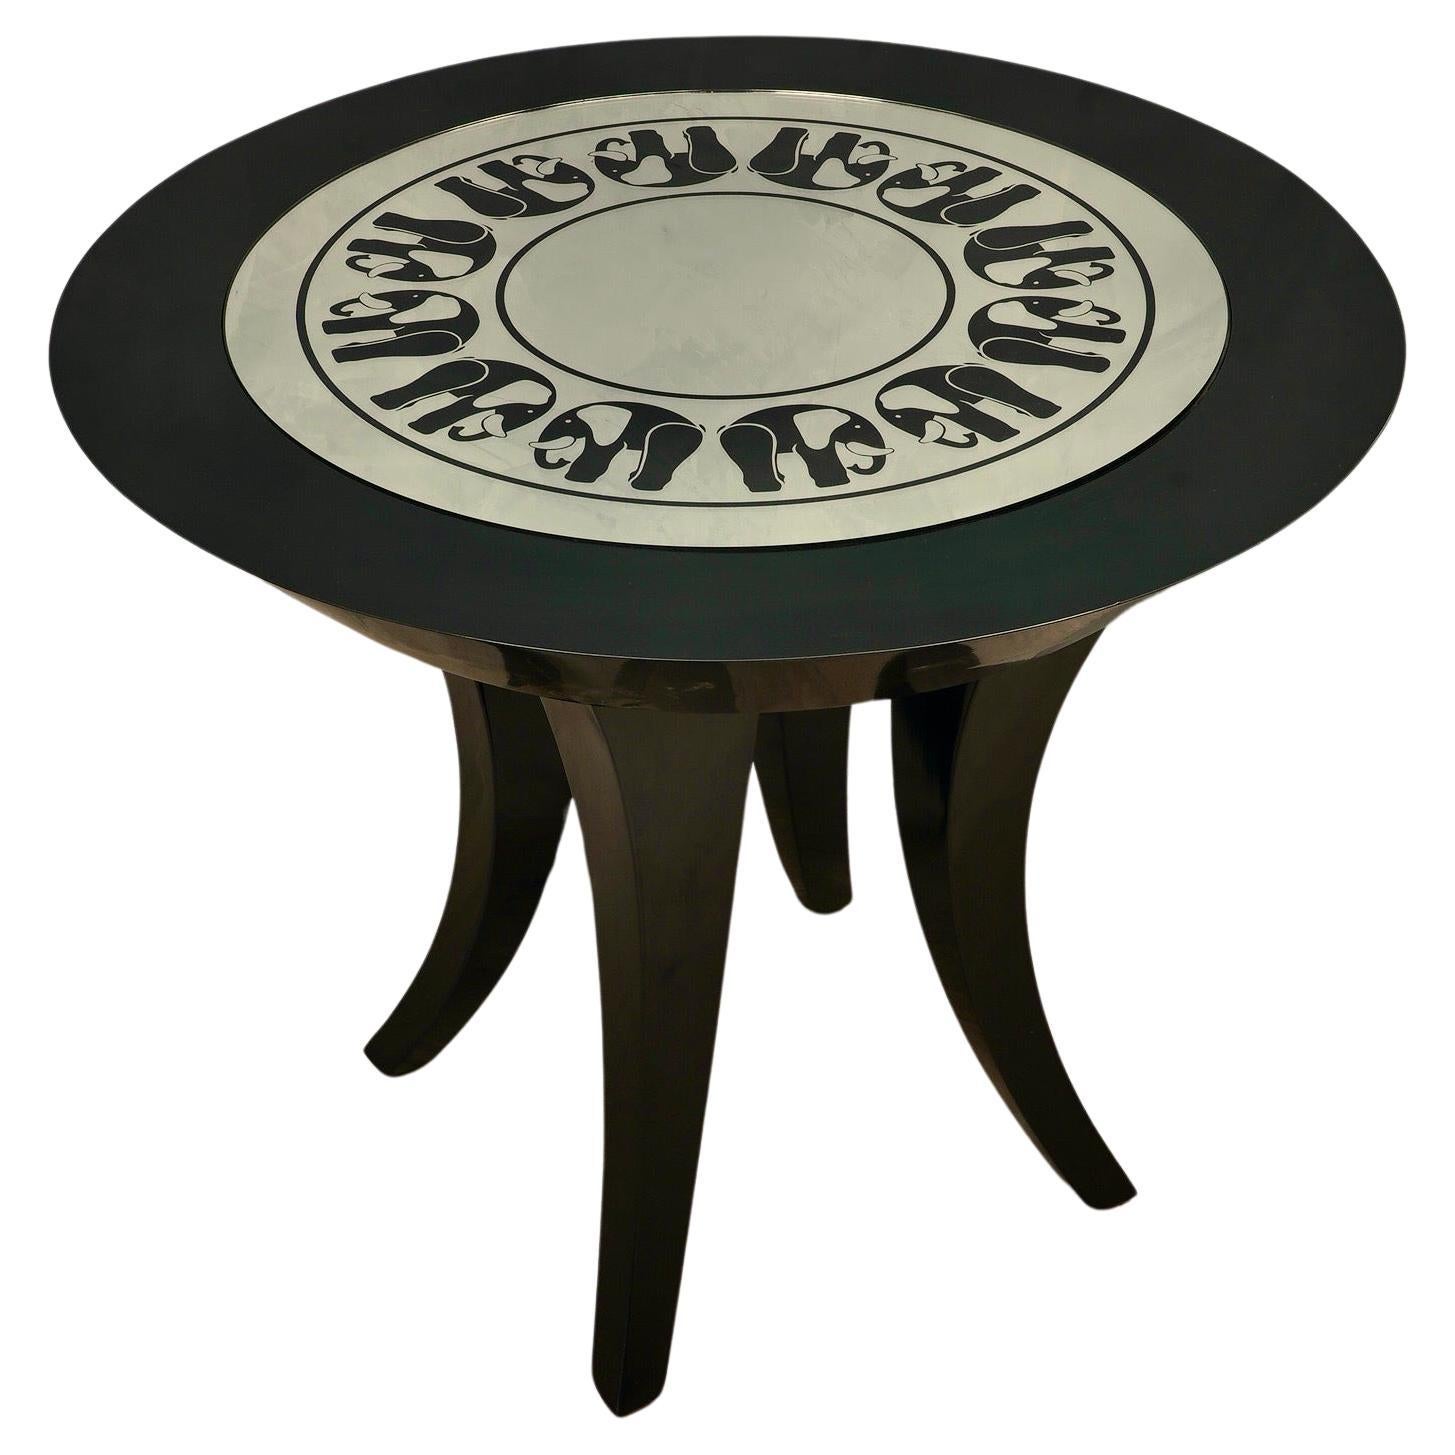 Midcentury Black Shellac and Engraved Mirror Italian Side Table, 1980